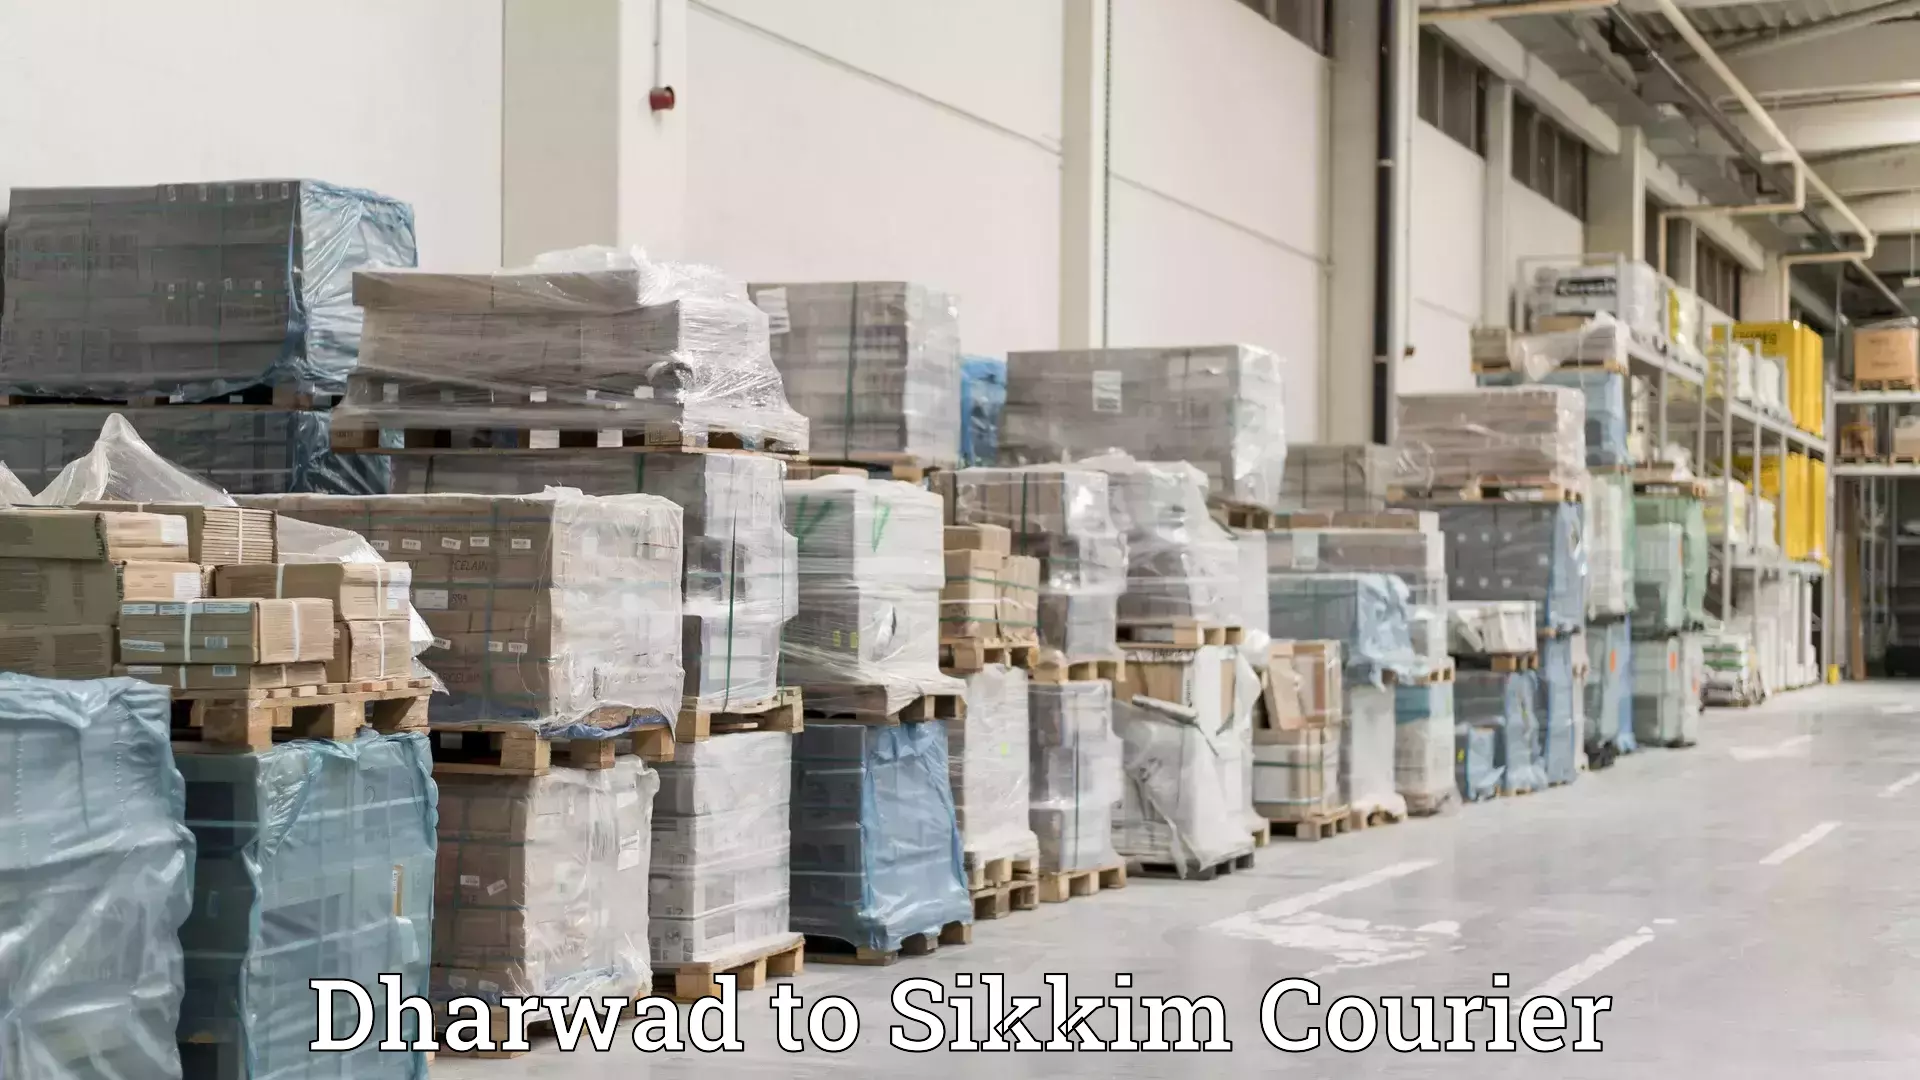 Furniture transport specialists Dharwad to Sikkim